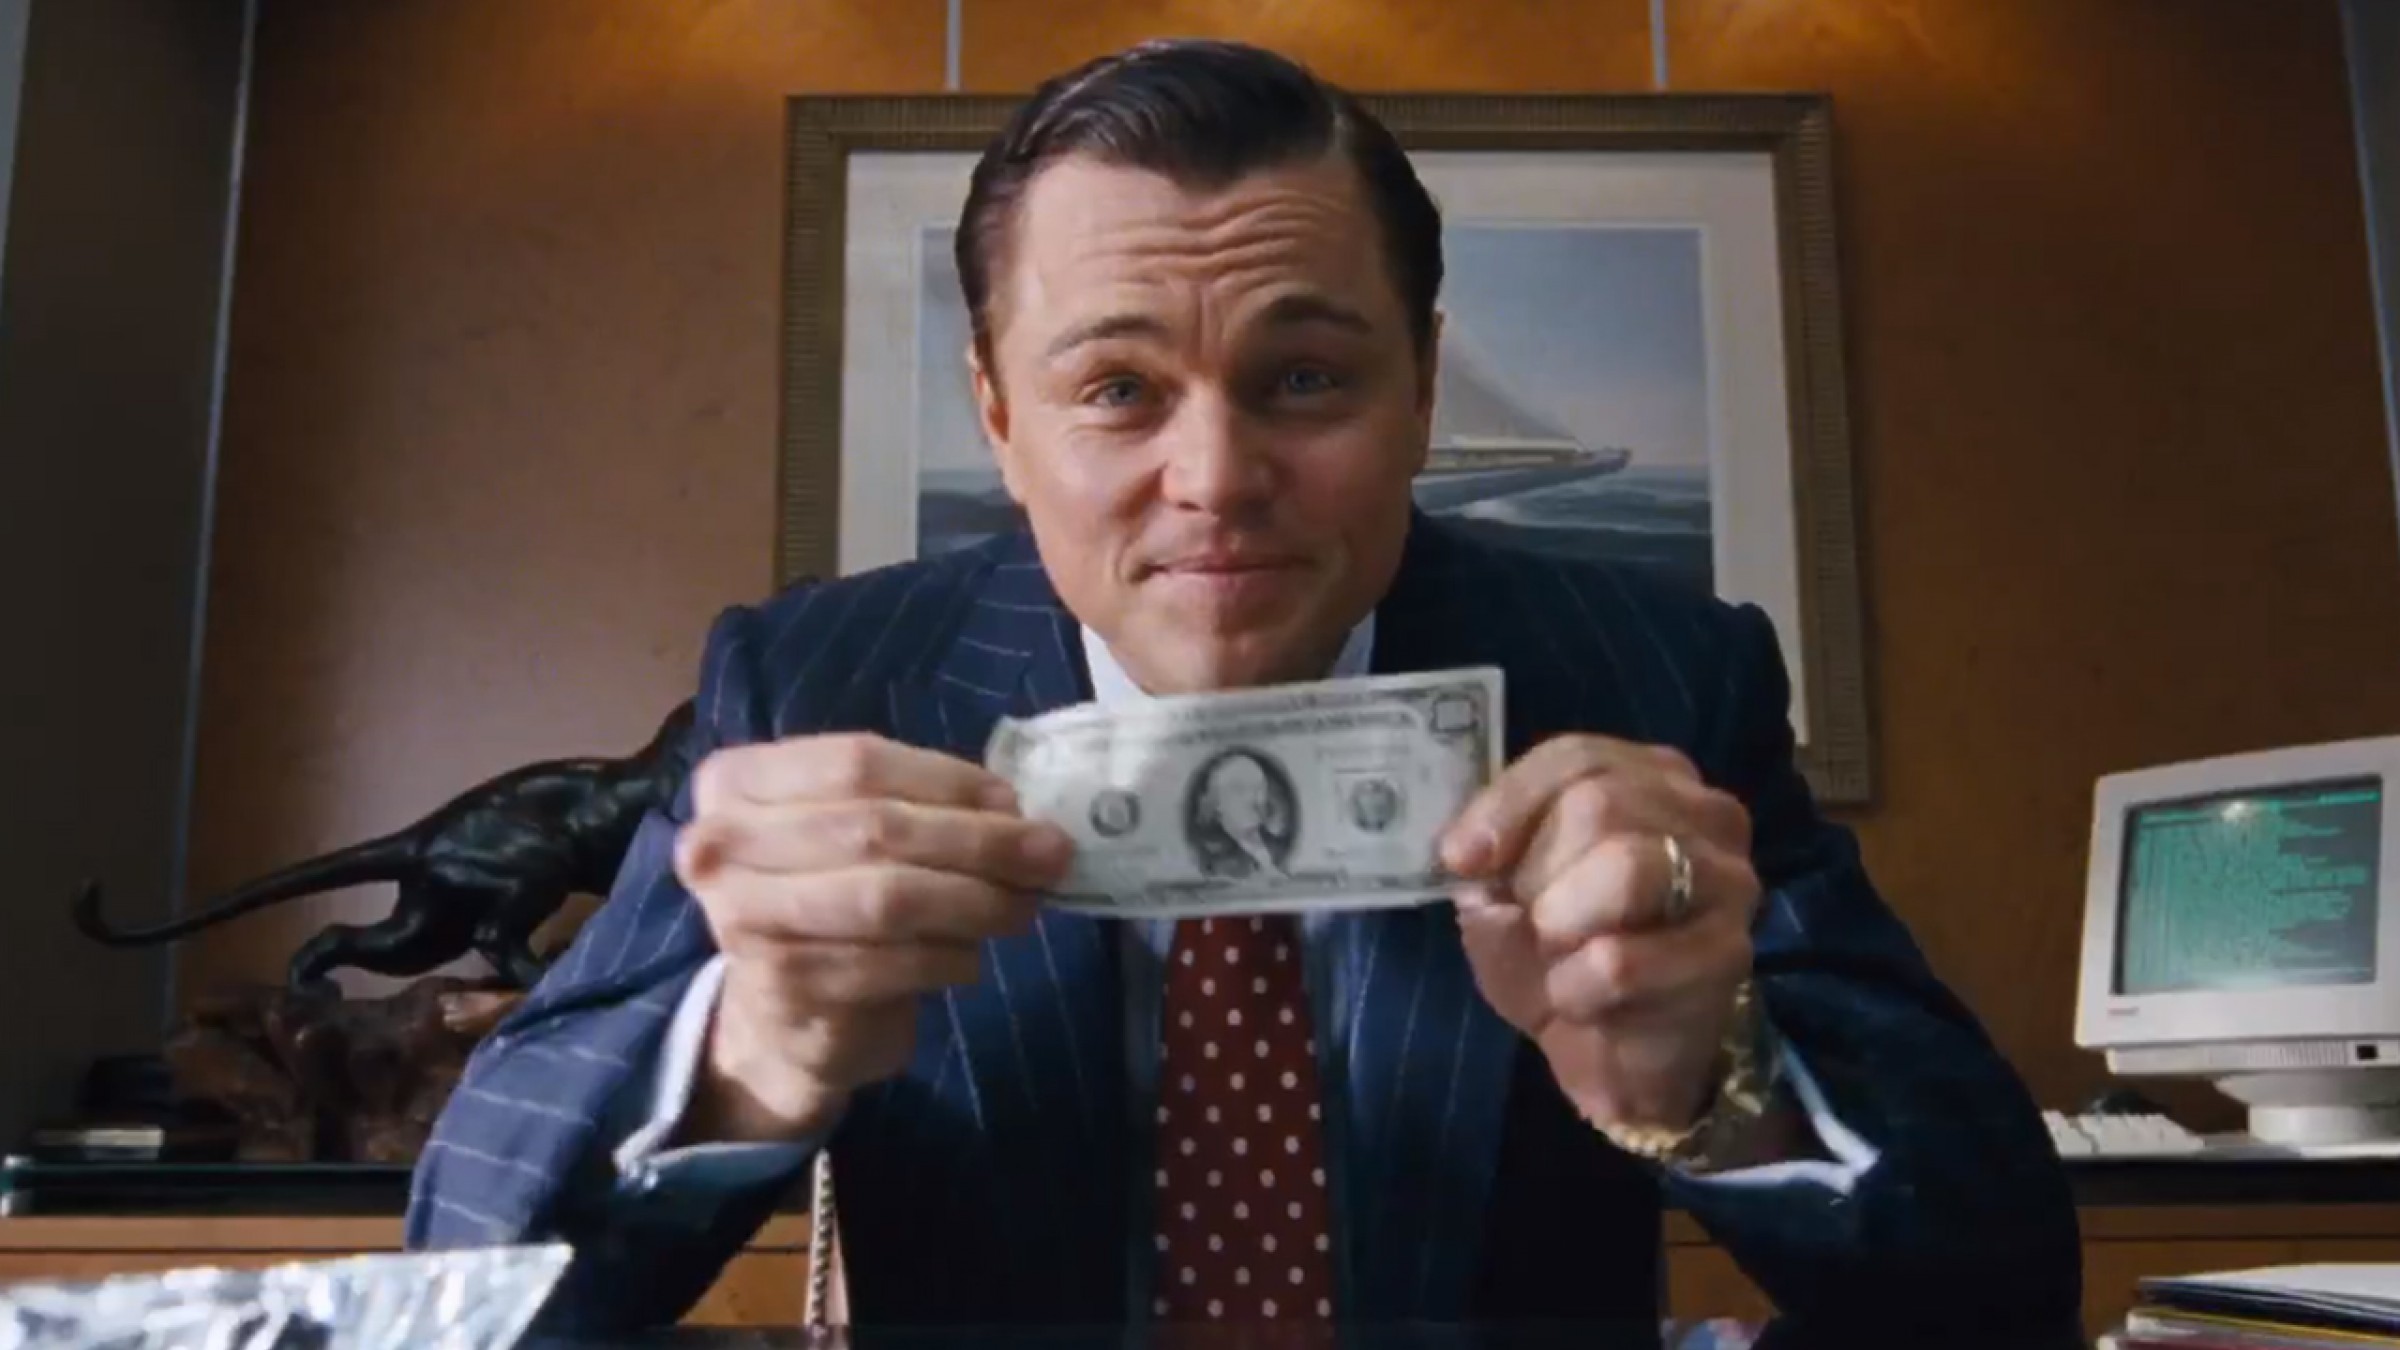 the wolf of wall street mp4 download